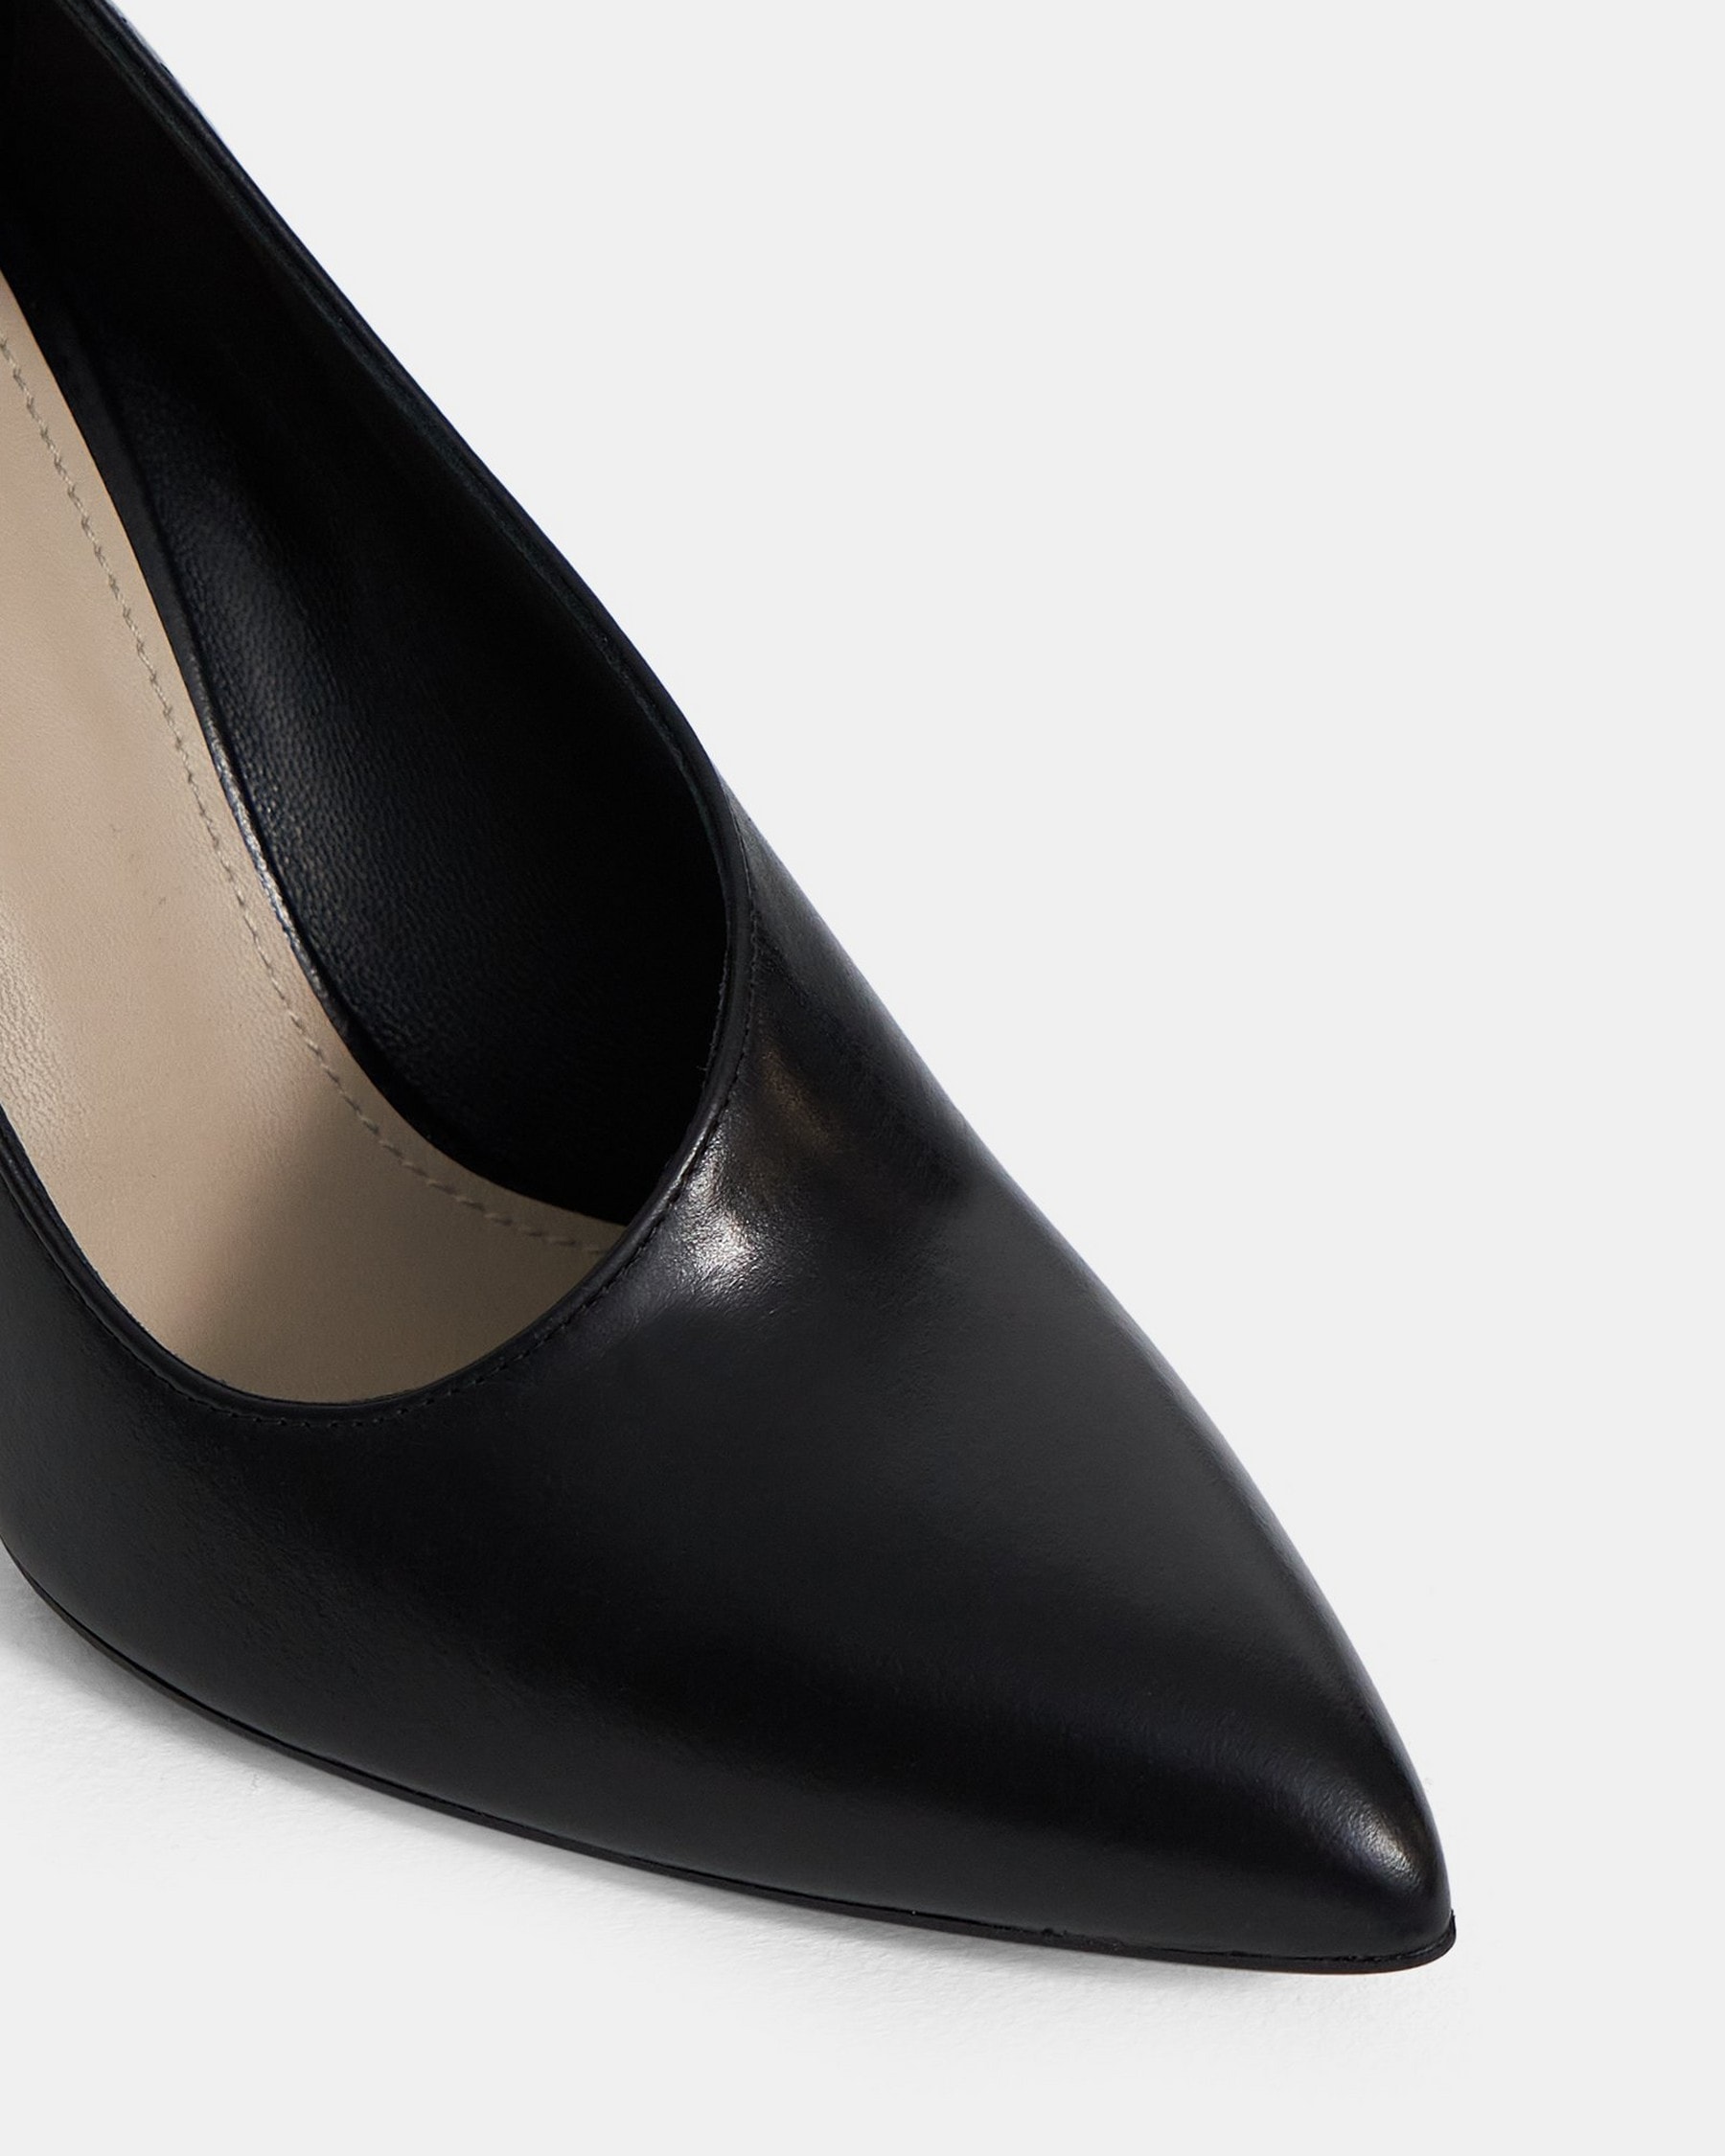 Asymmetric Pump in Glossed Leather